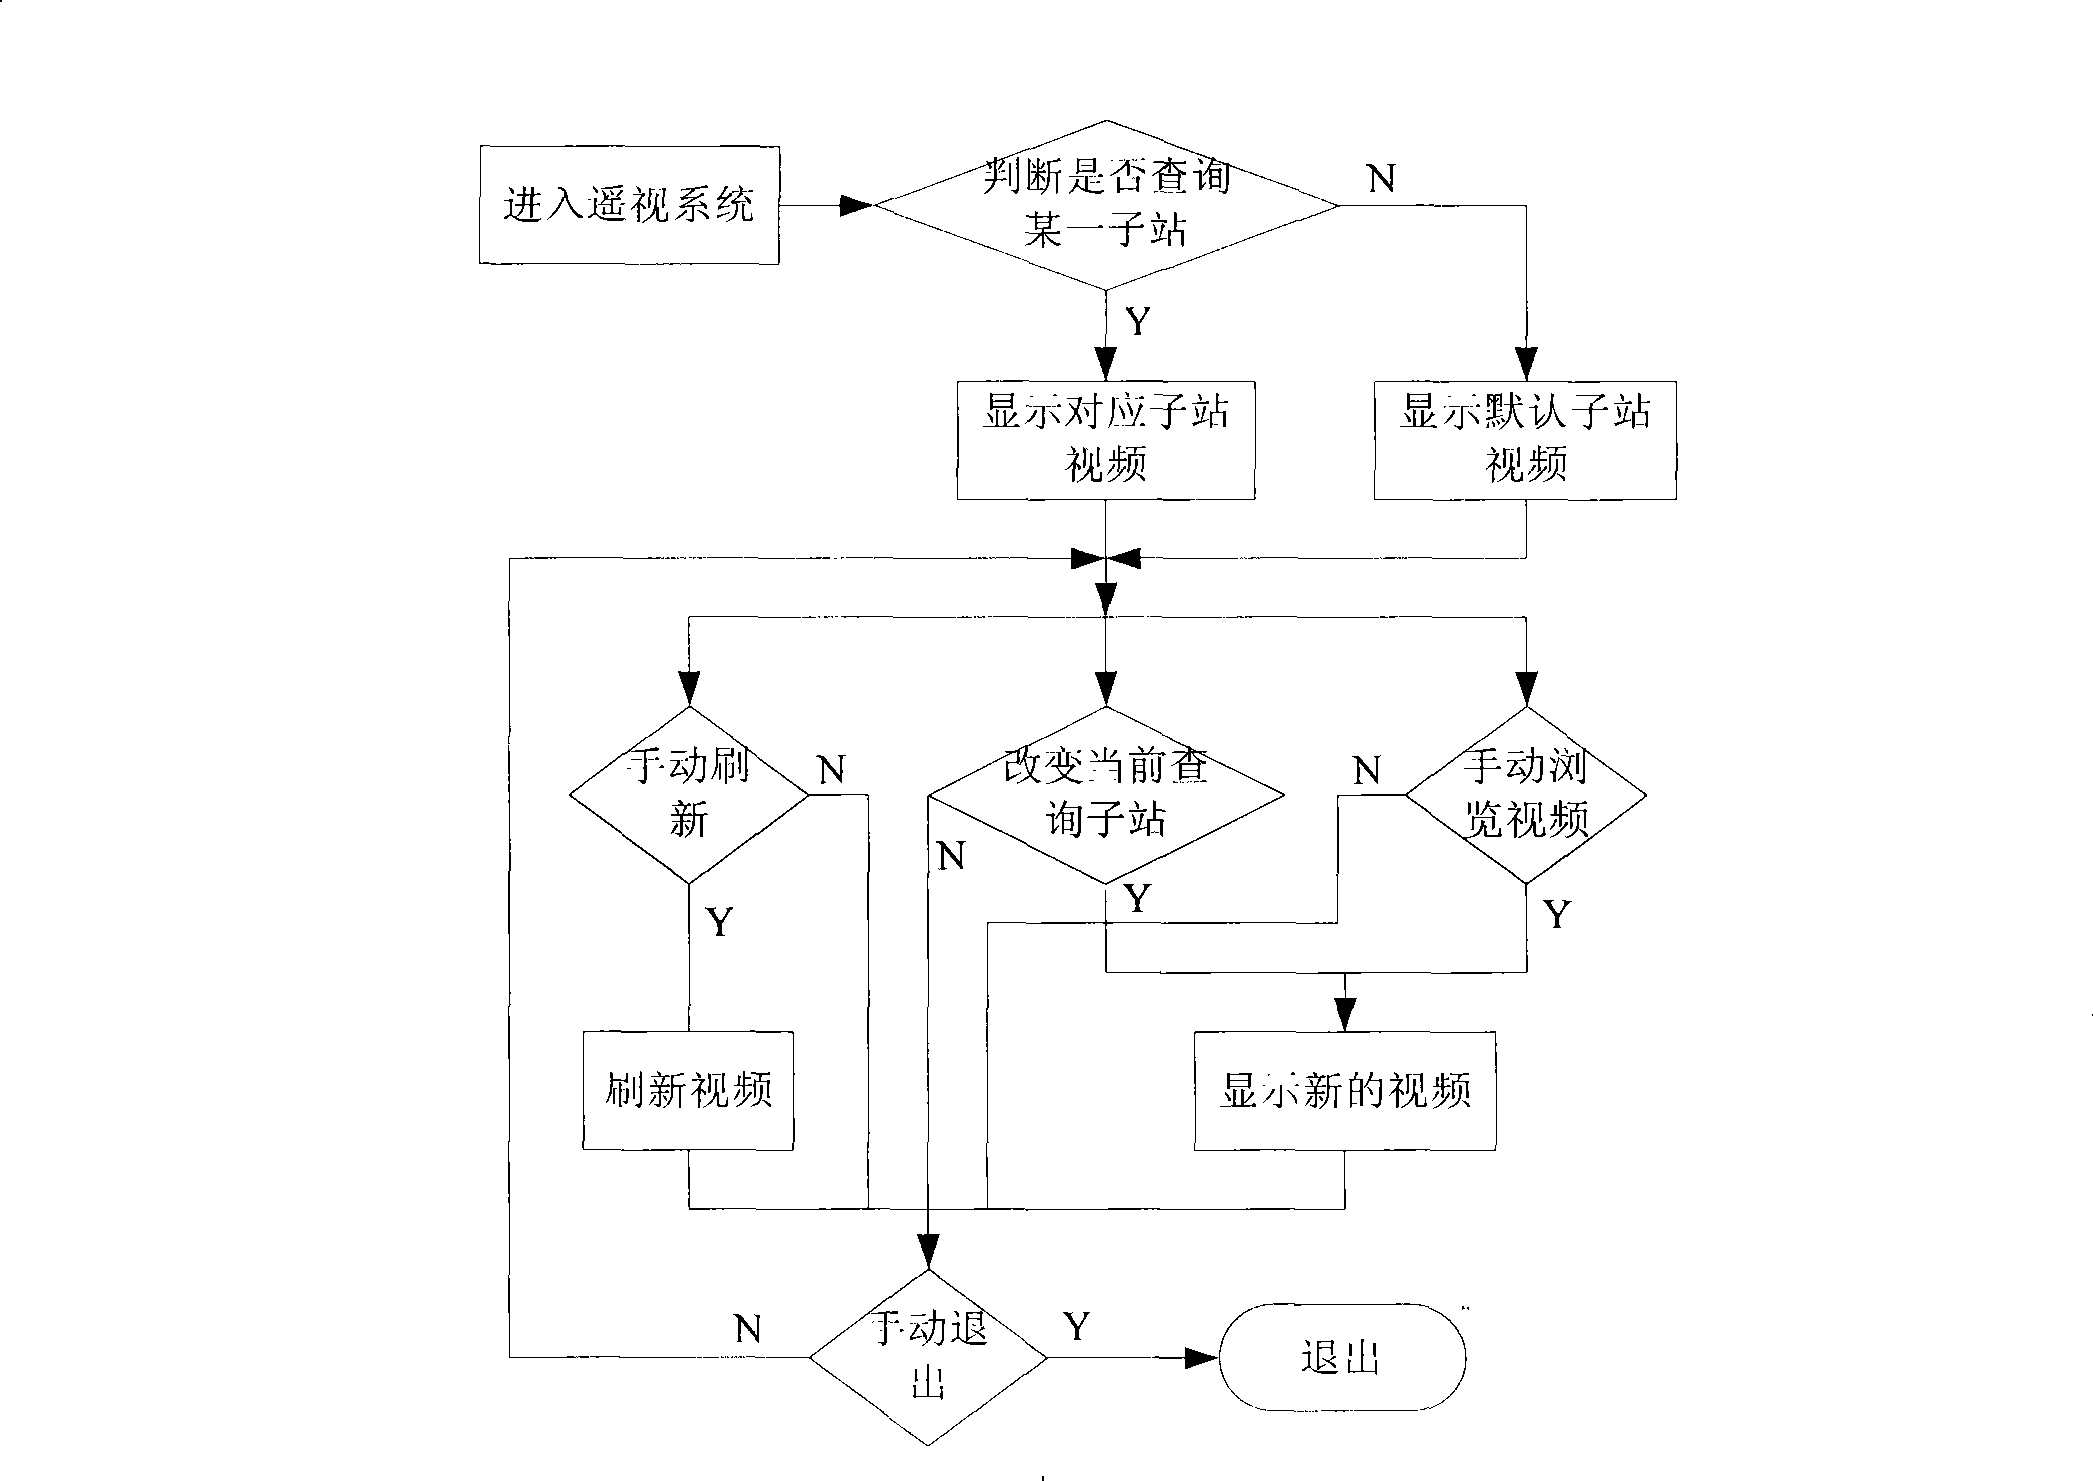 Method for implementing electric grid scheduling automation